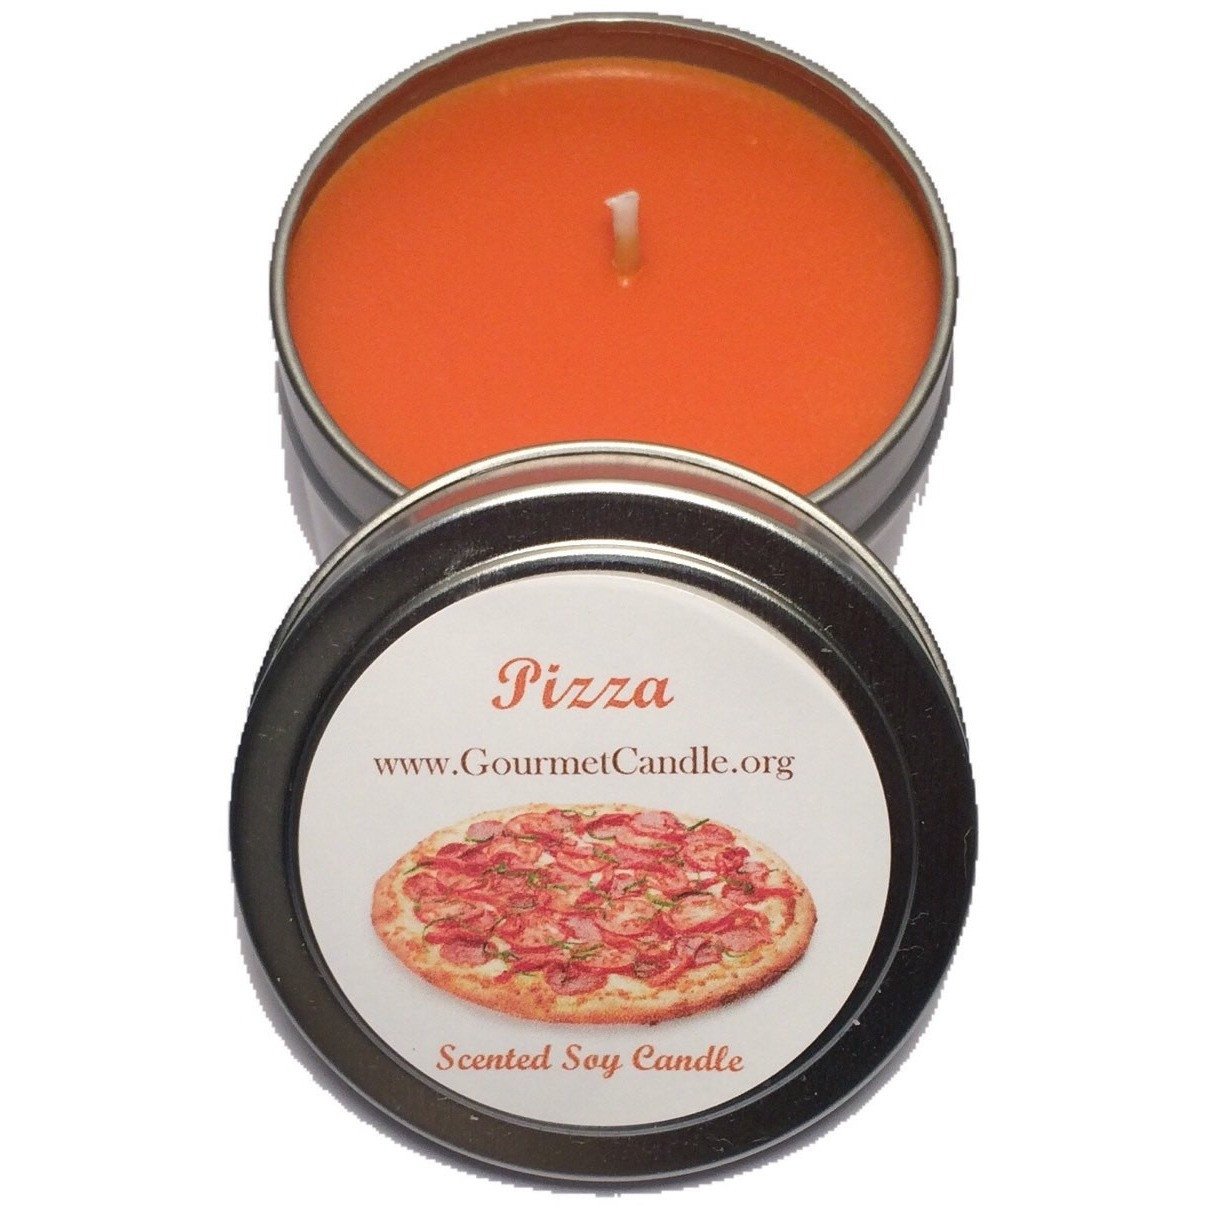 Gifts for Women, Gift Ideas, Unique Gifts Pizza Candle - Gourmet Candle